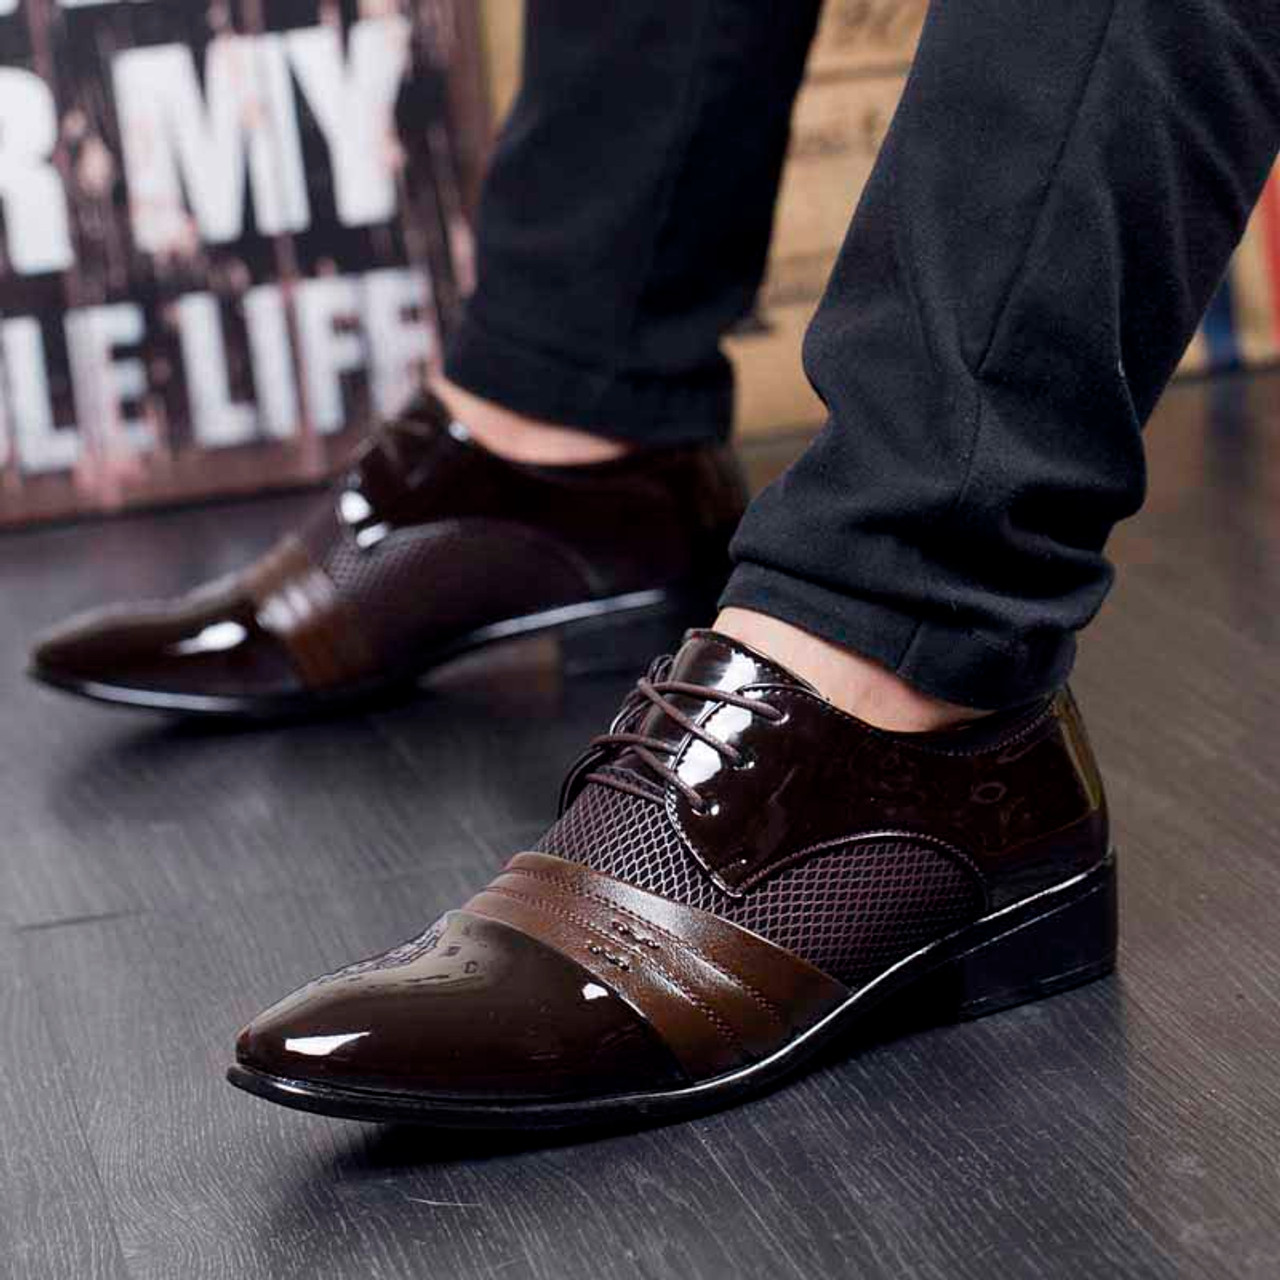 Brown check pattern leather derby dress shoe | Mens dress shoes online ...